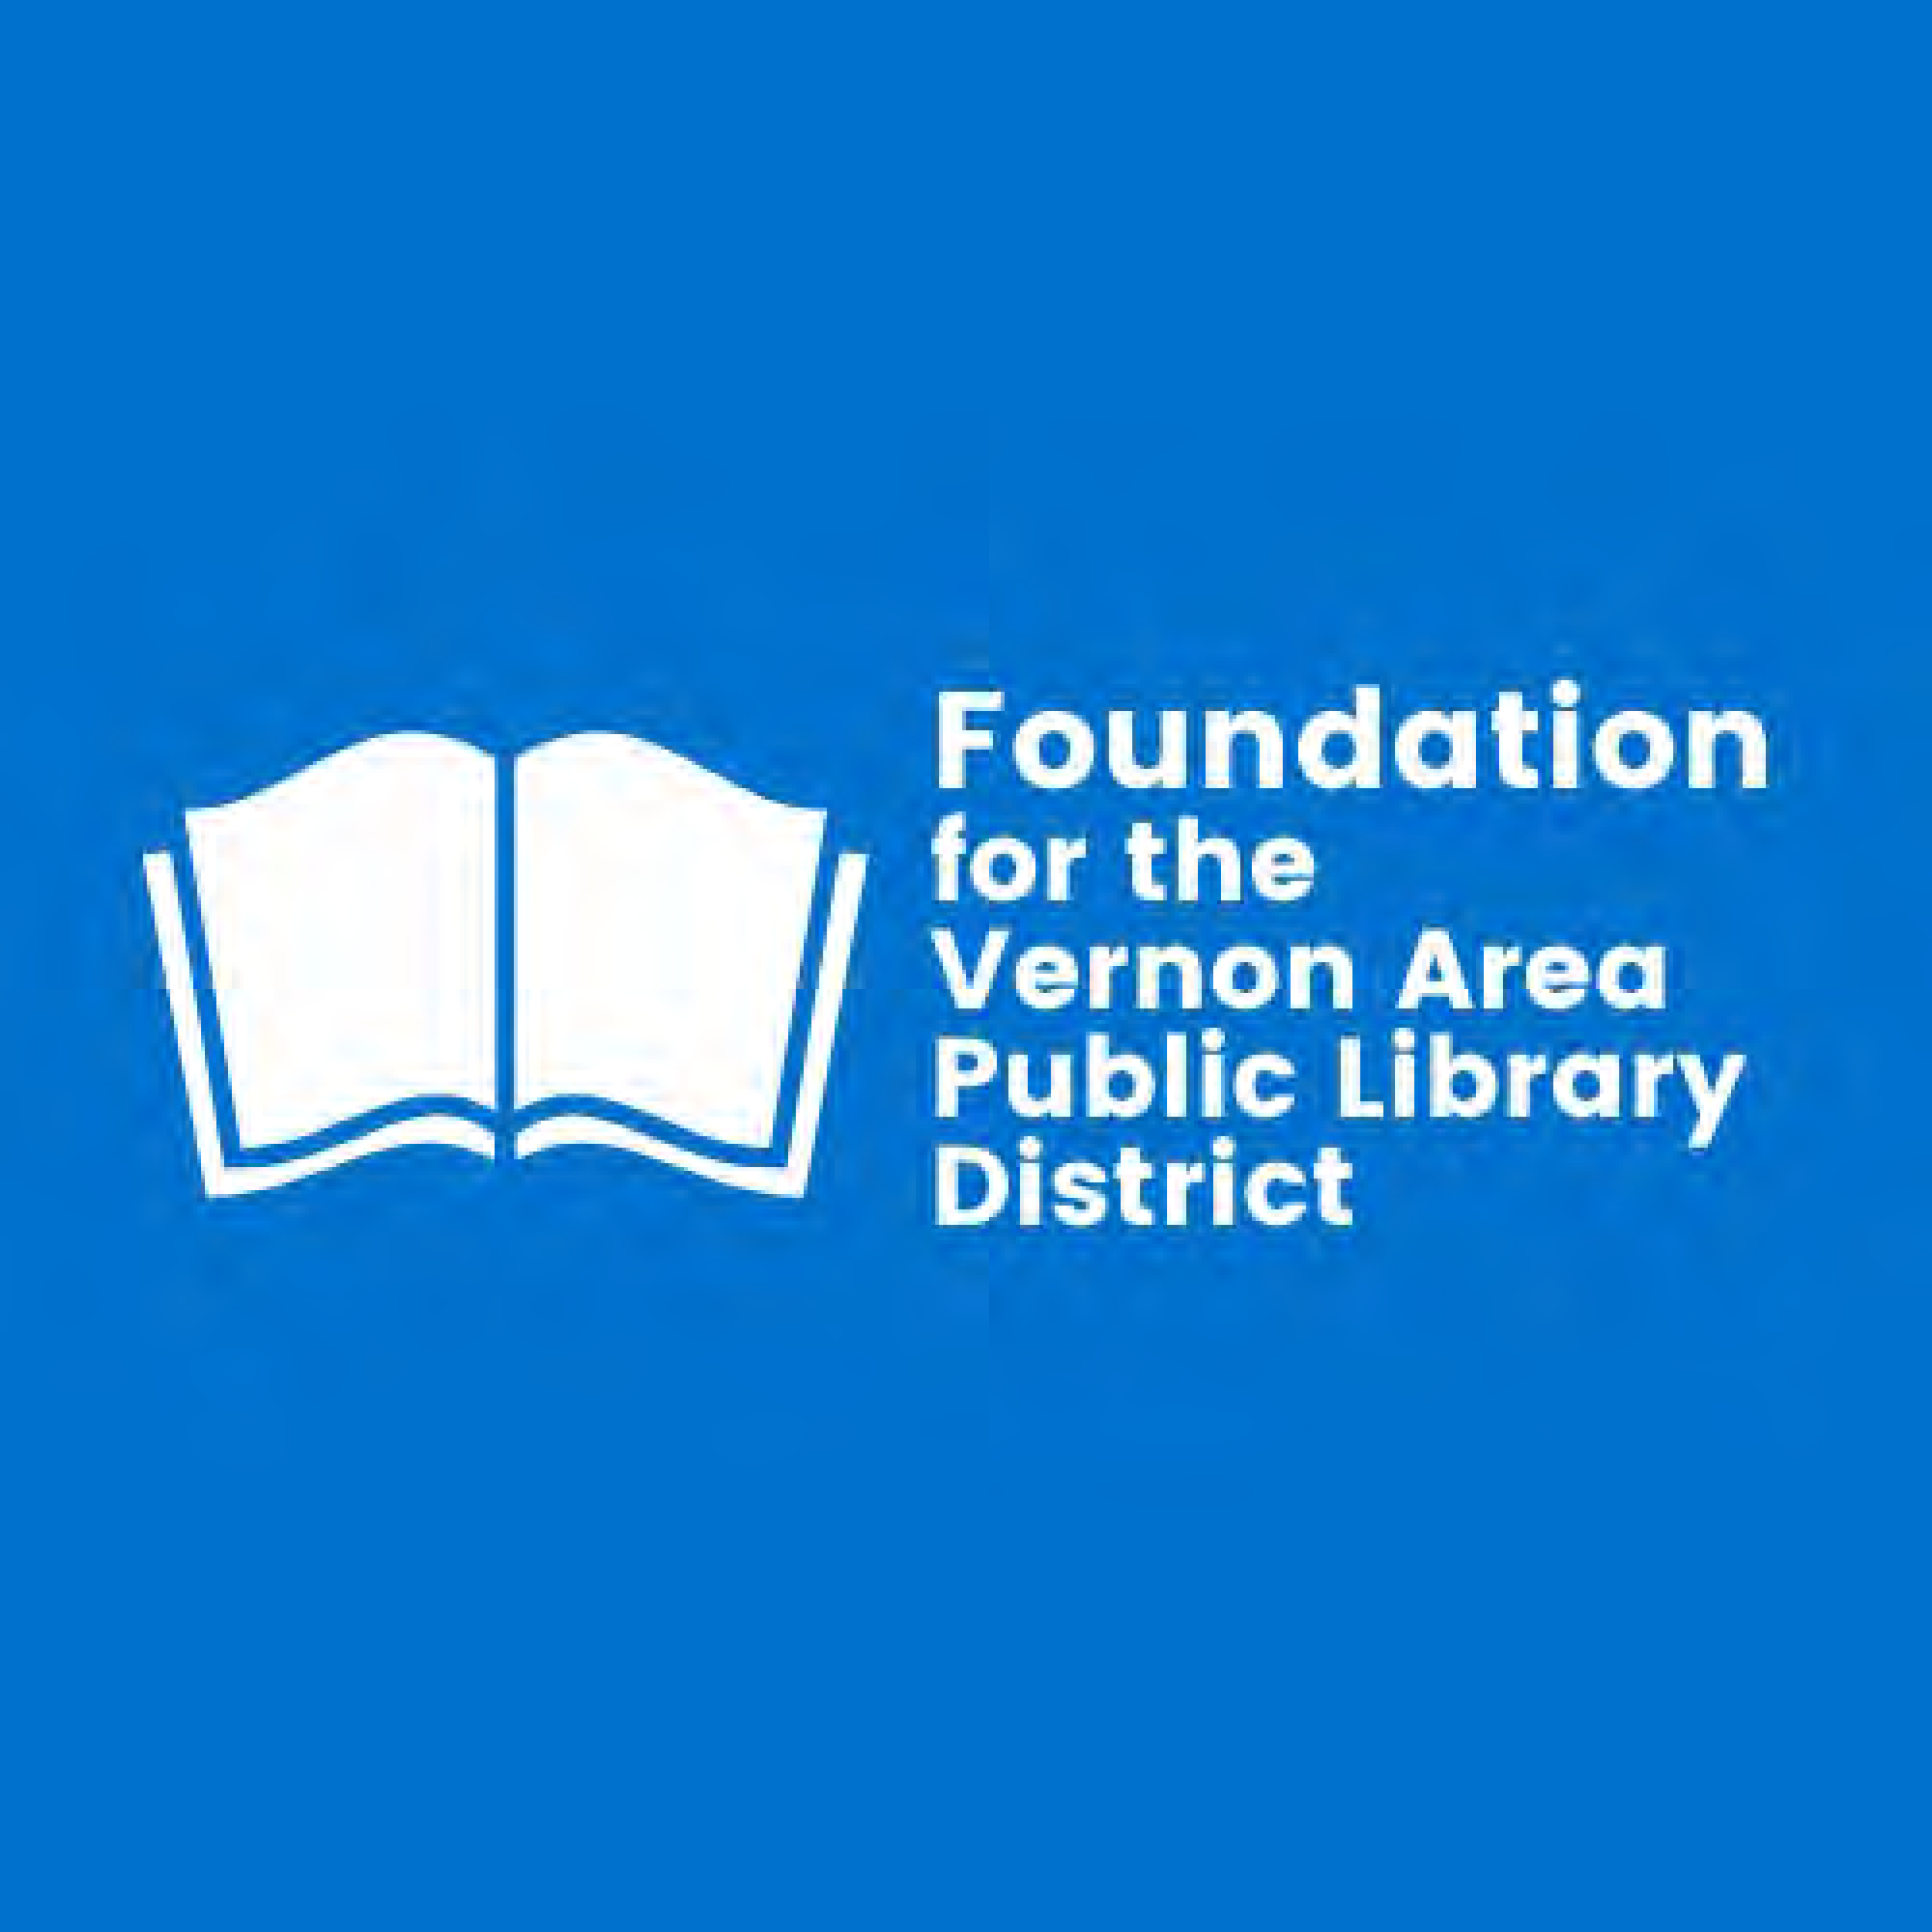 Logo for the Foundation for the Vernon Area Public Library District, which is an icon of a book and the name in text